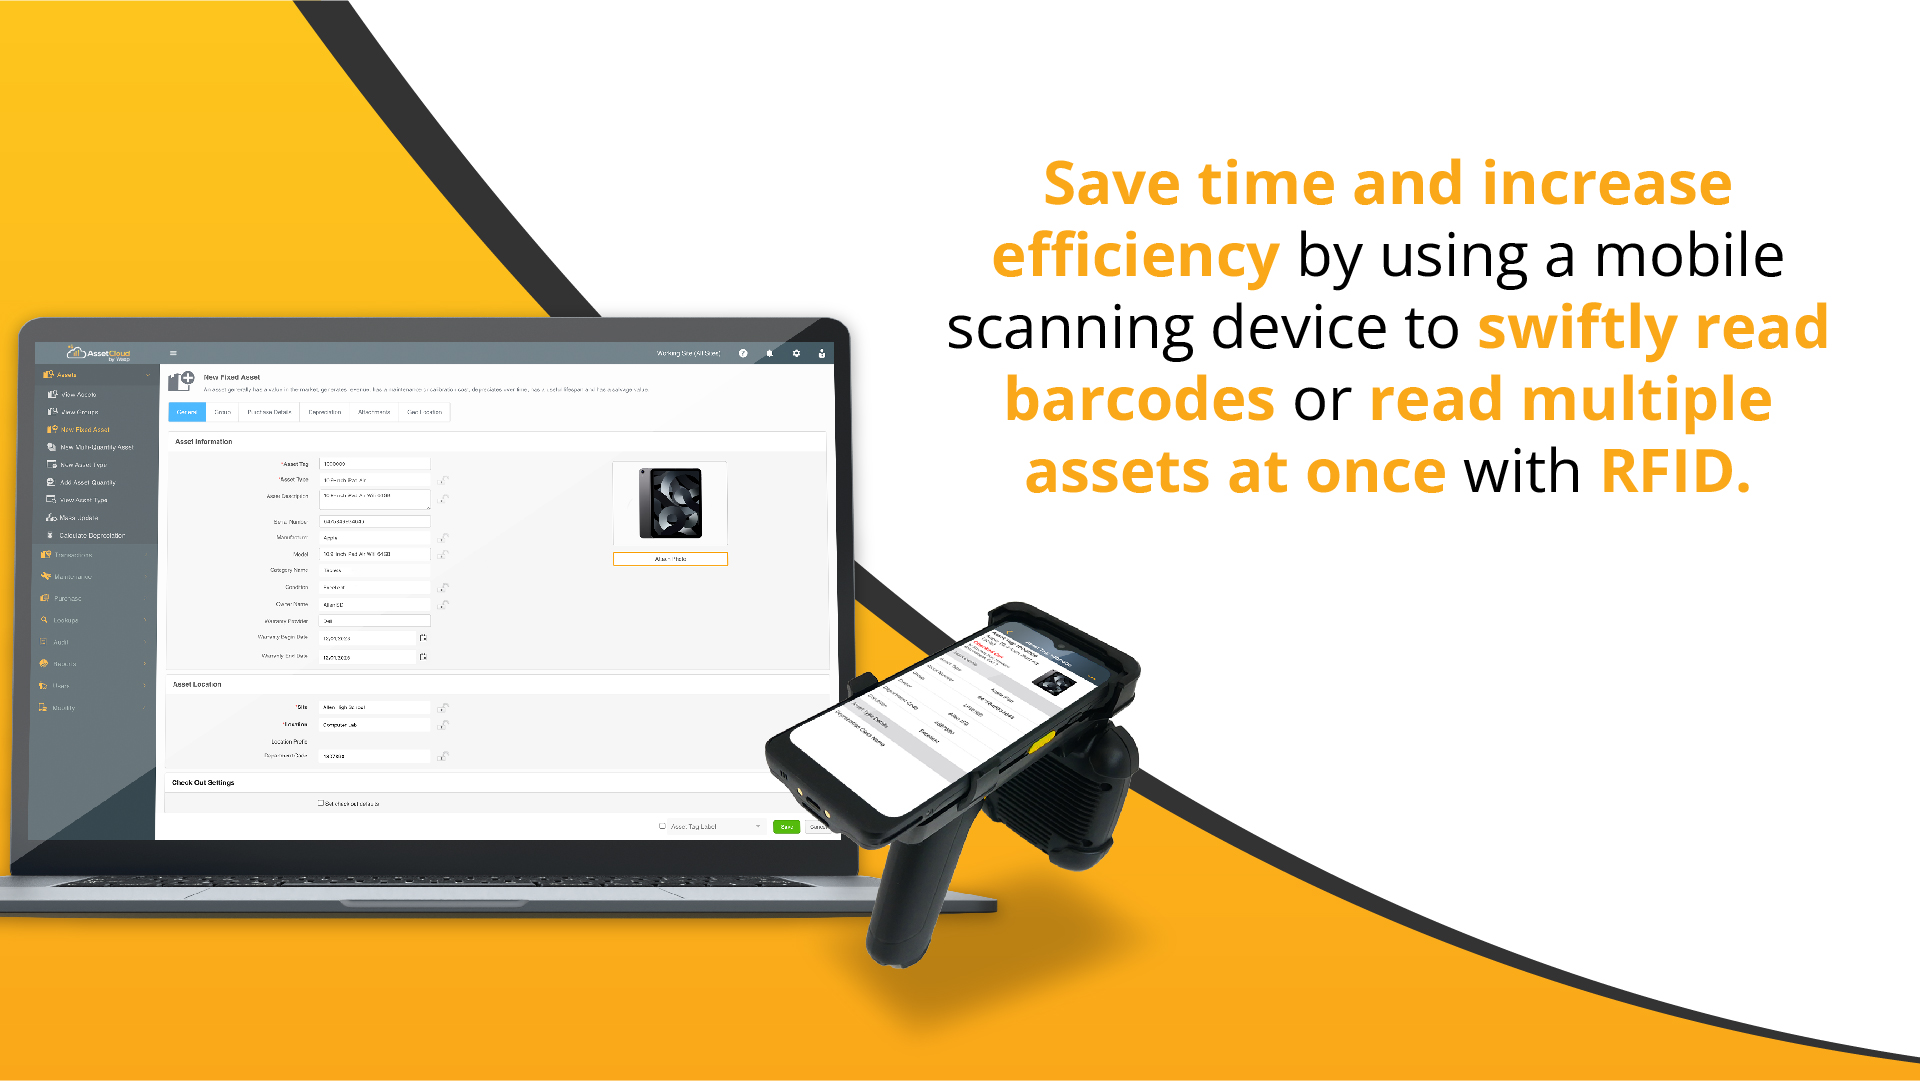 Save time and increase efficiency by using a mobile scanning device to swiftly read barcodes or read multiple assets at once with RFID